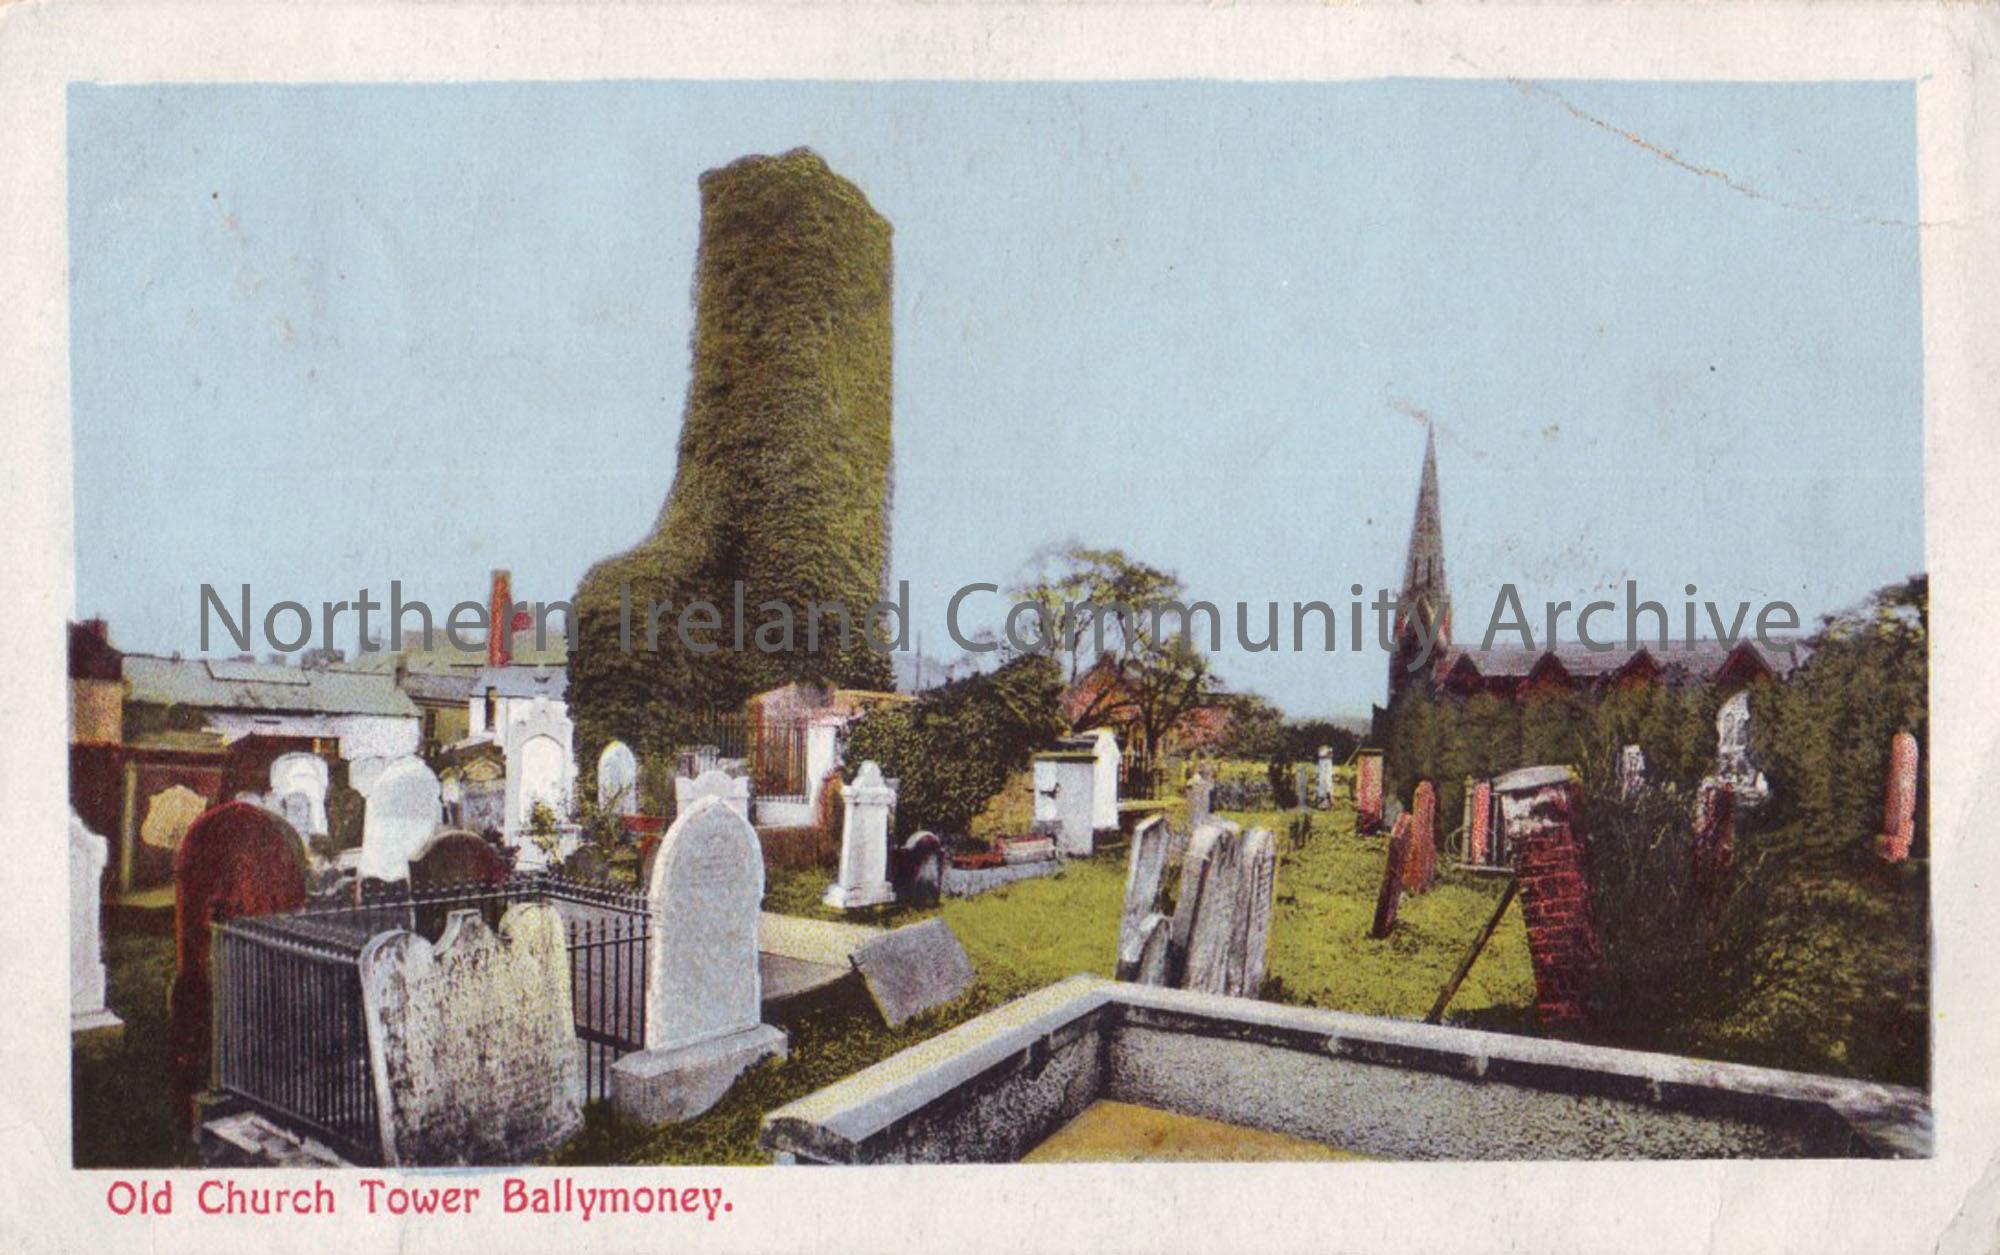 Coloured photograph of the Old church Tower, with graveyard in the foreground